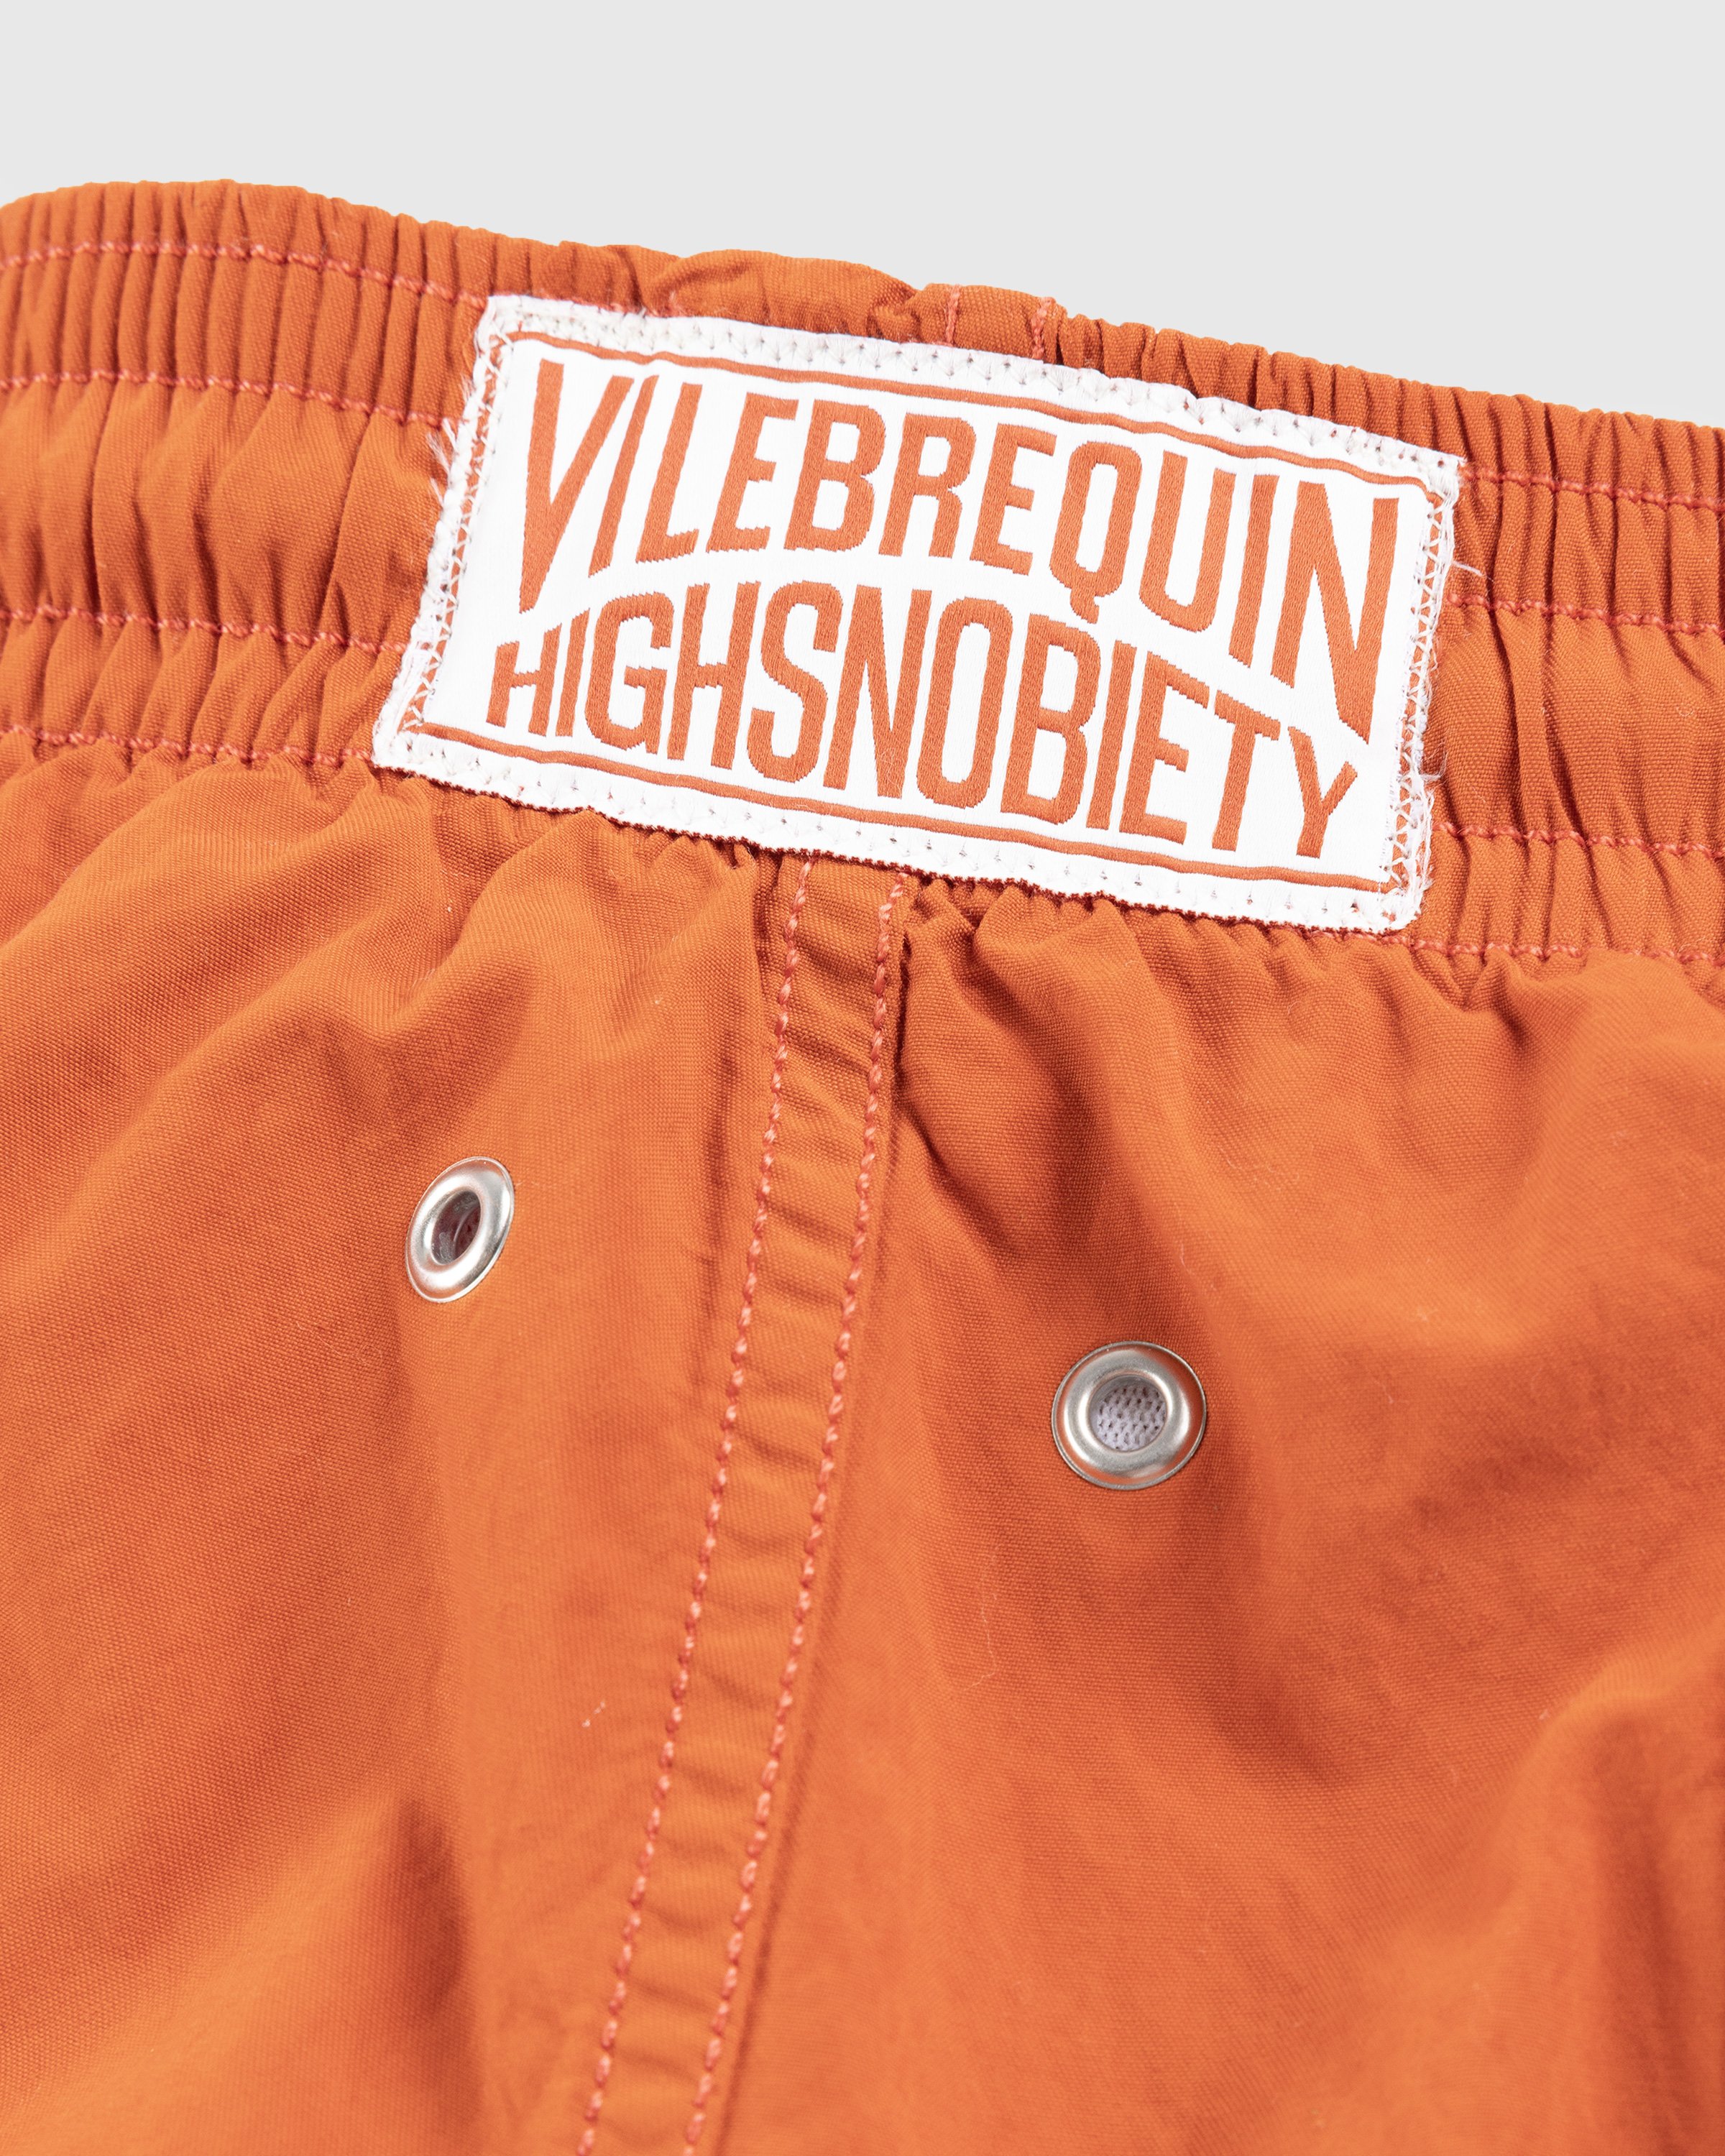 Vilebrequin x Highsnobiety - Solid Swim Shorts Red Tea - Clothing - Red - Image 7